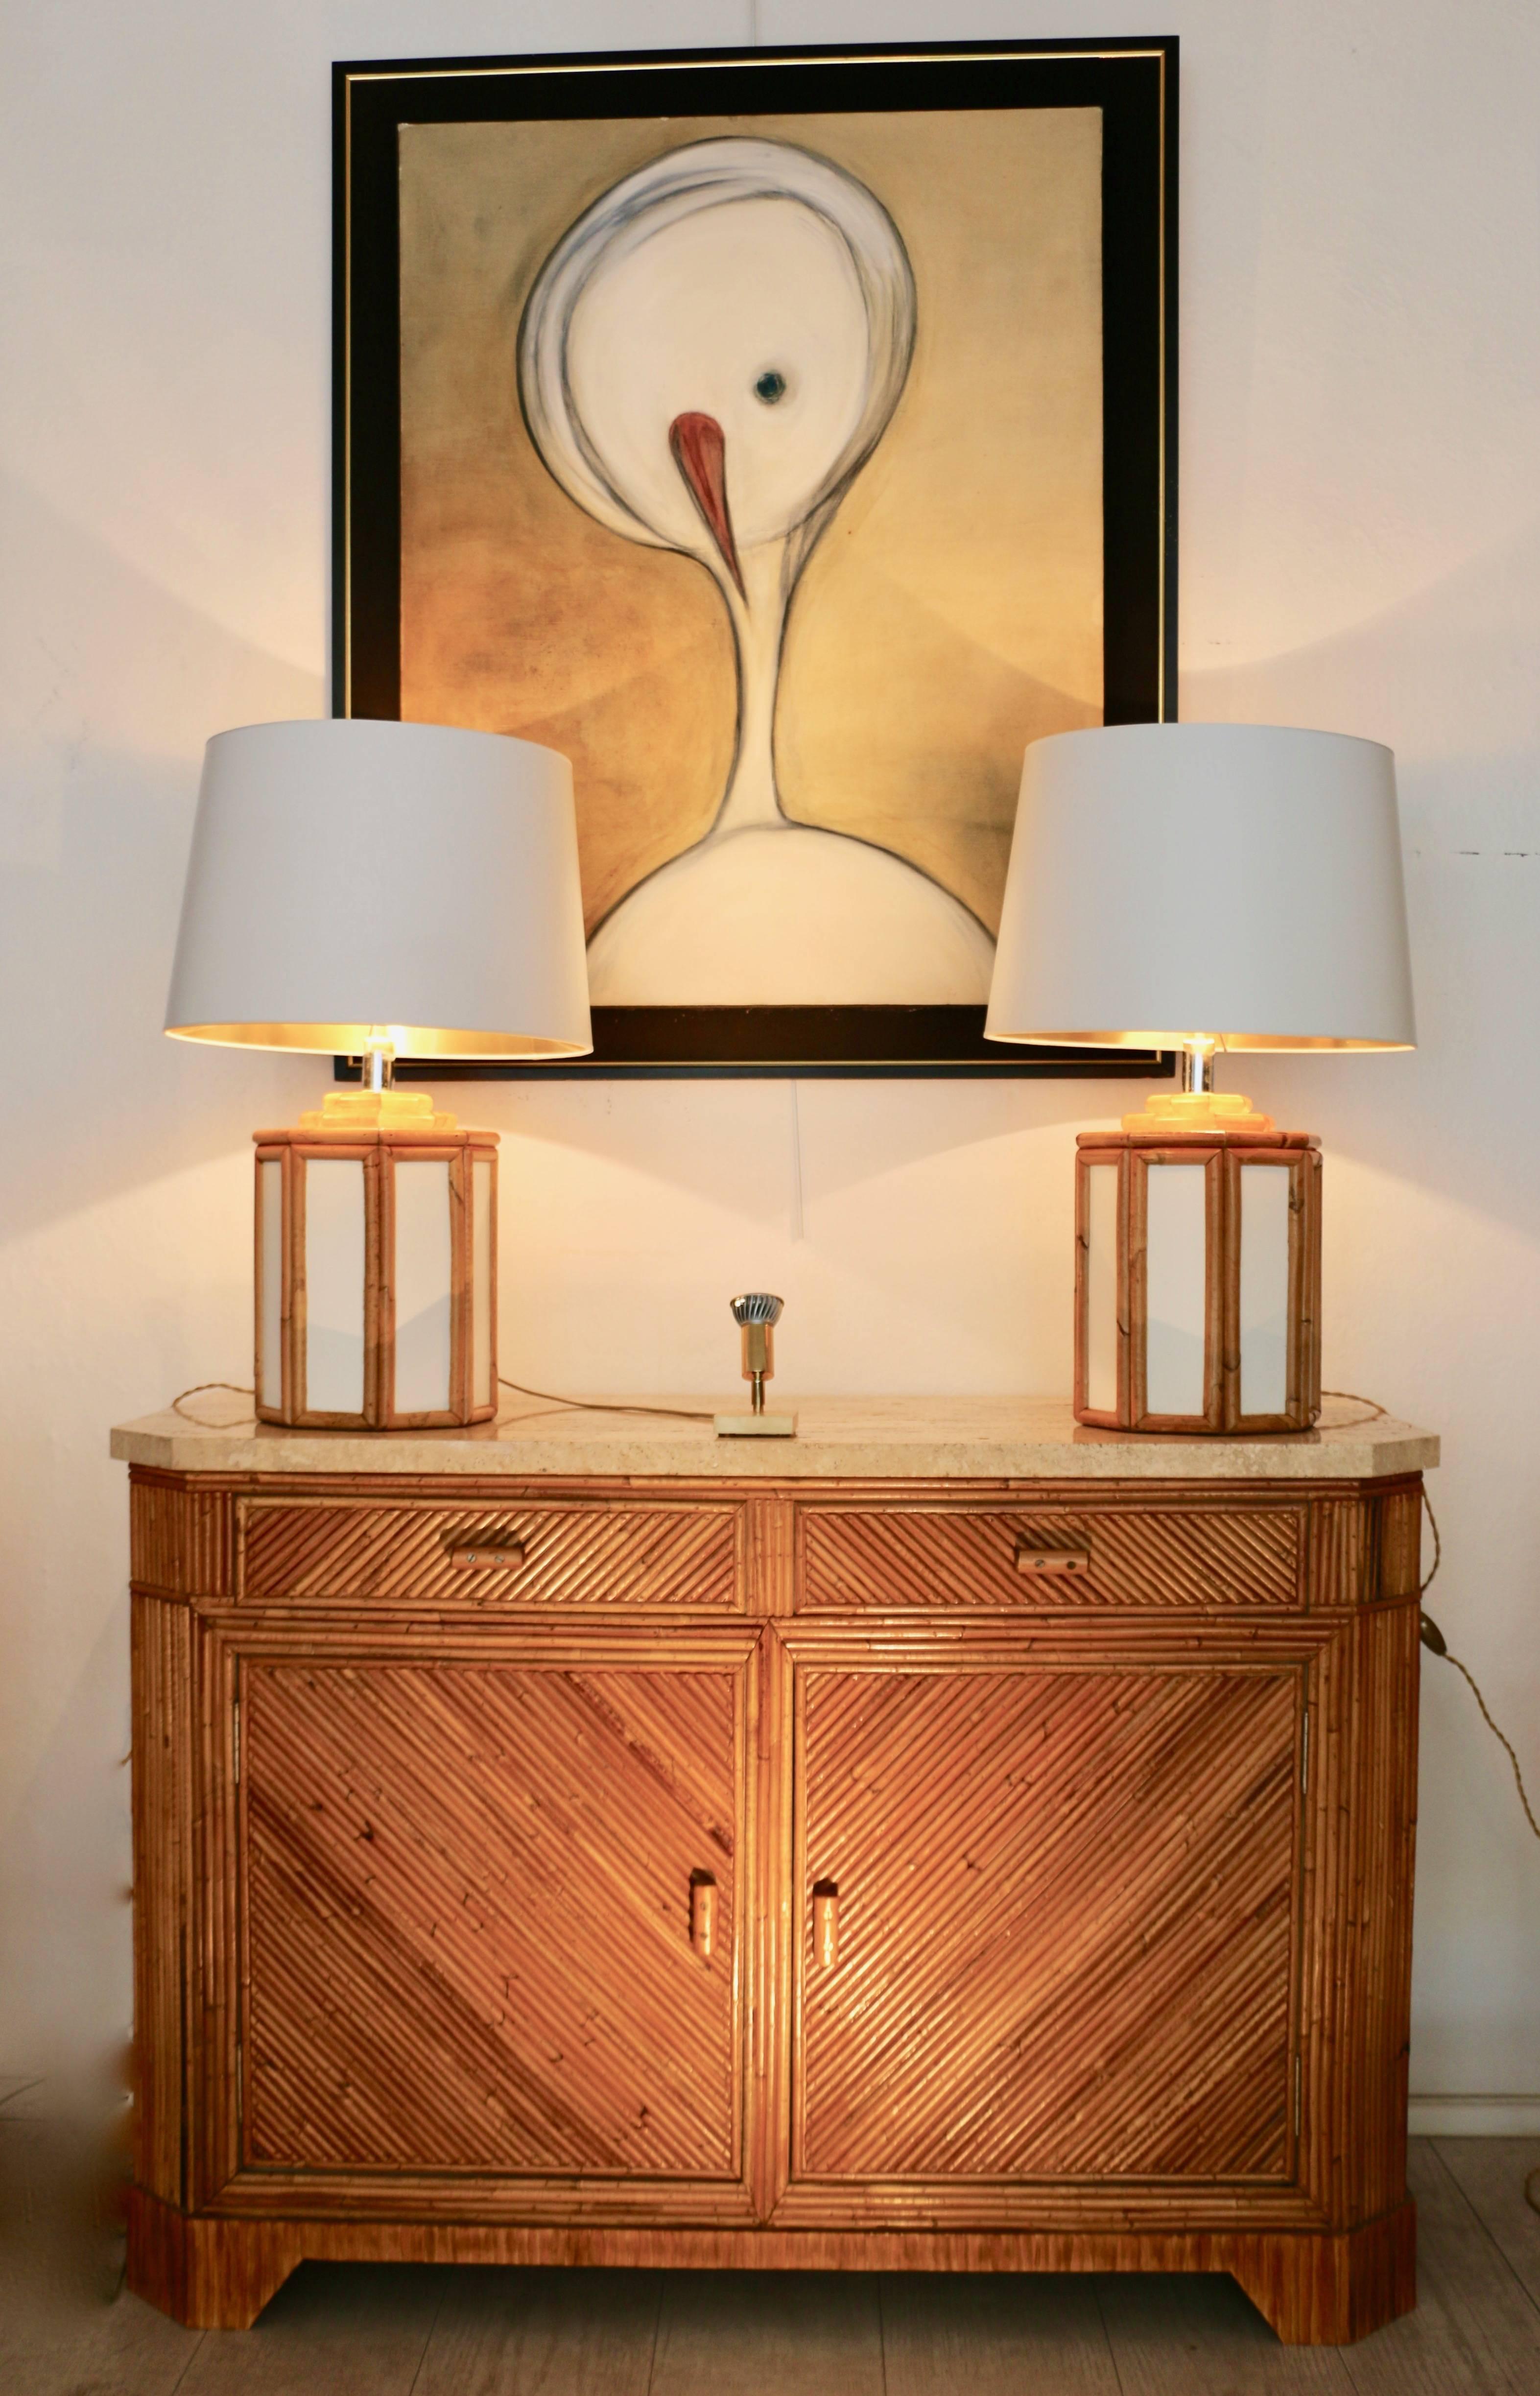 Late 20th Century Pair of Table Lamps with a Bamboo Decor, circa 1980